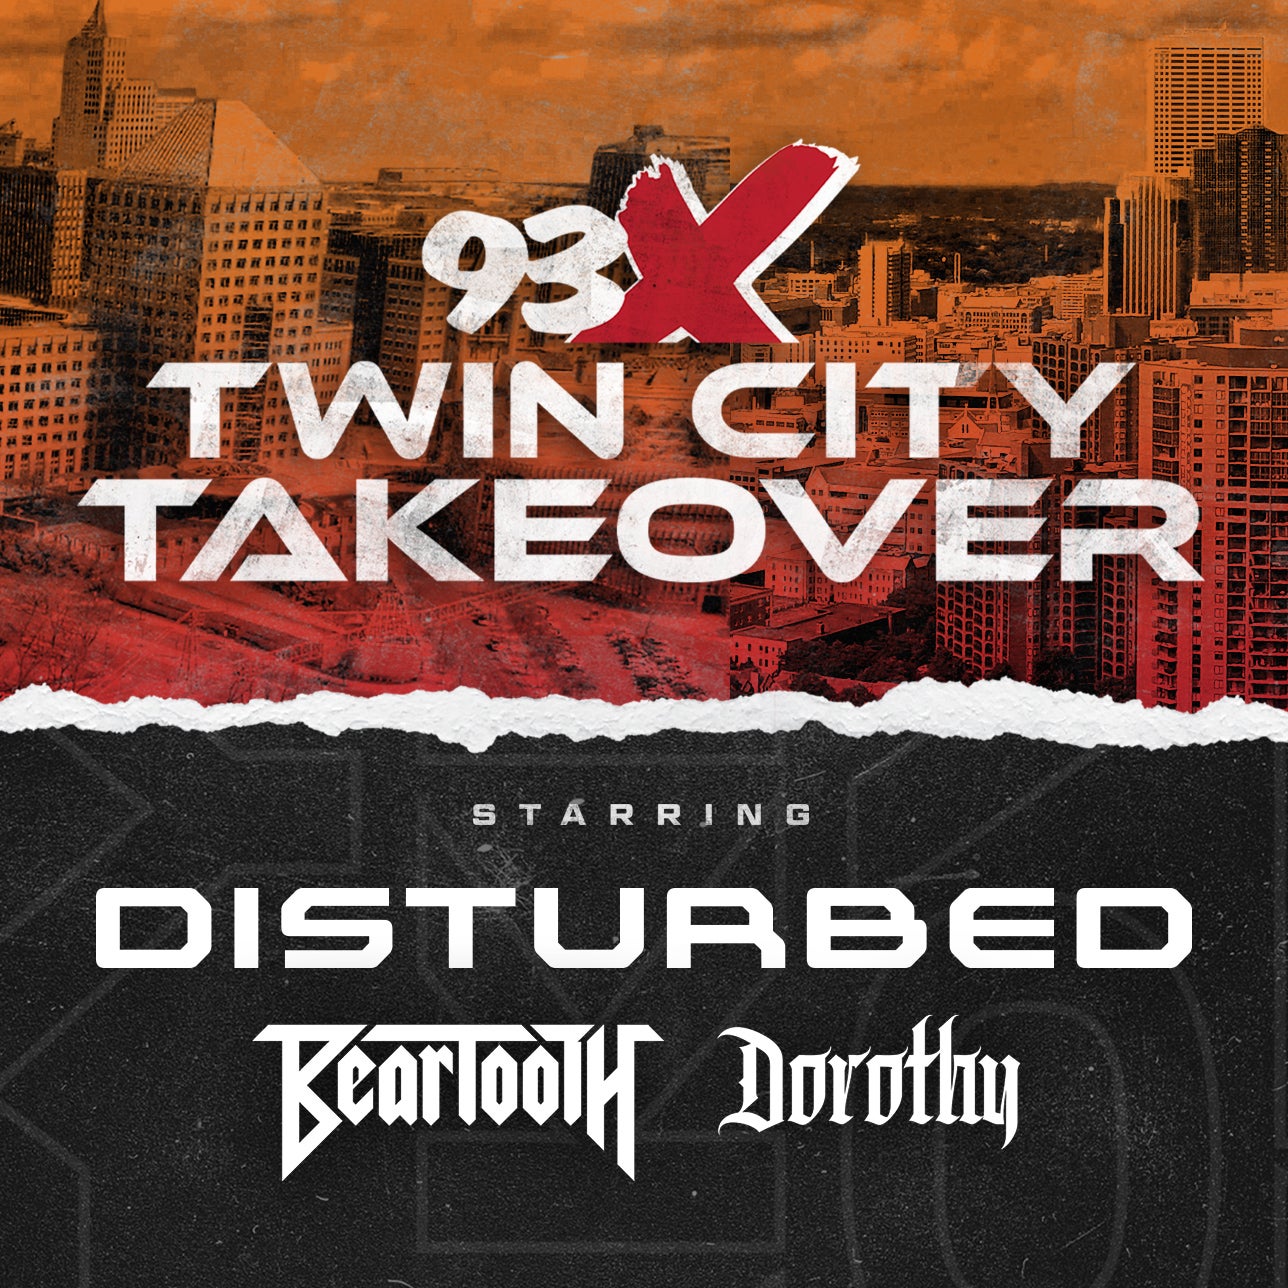 93X Twin City Takeover starring Disturbed Xcel Energy Center